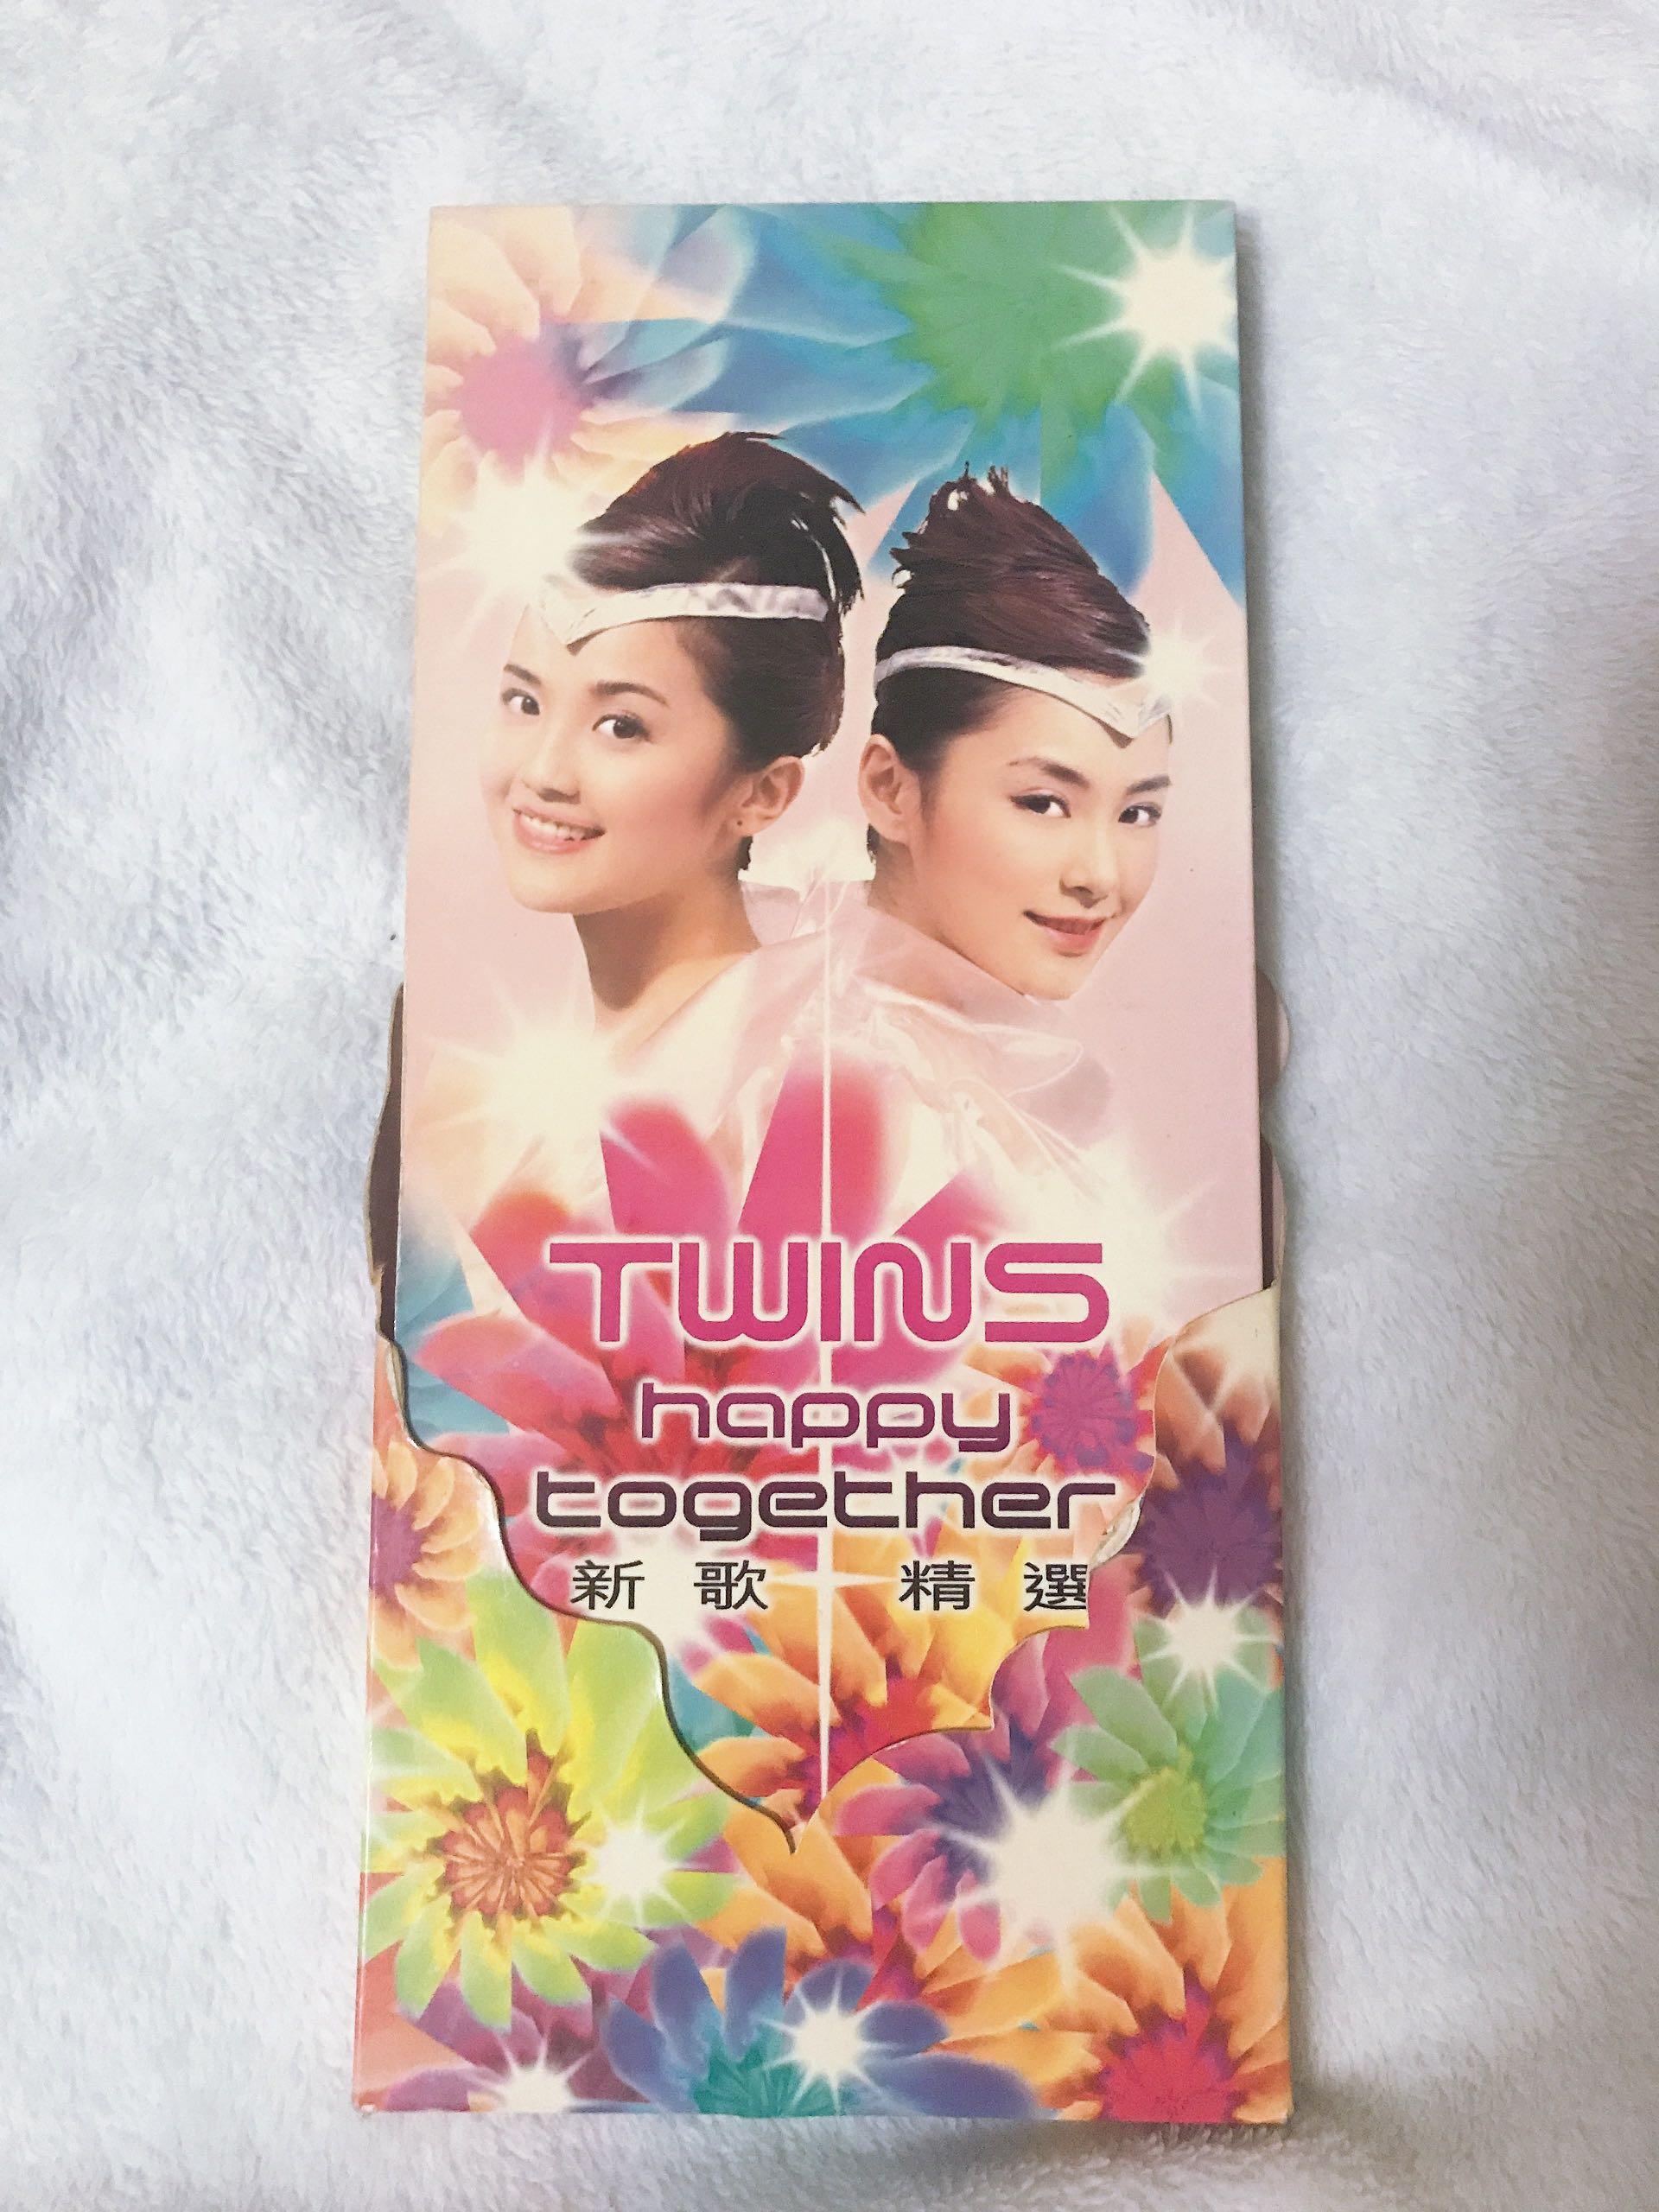 Twins Happy Together新曲加精選專輯（2003）CD/VCD 連839期Yes Puzzle